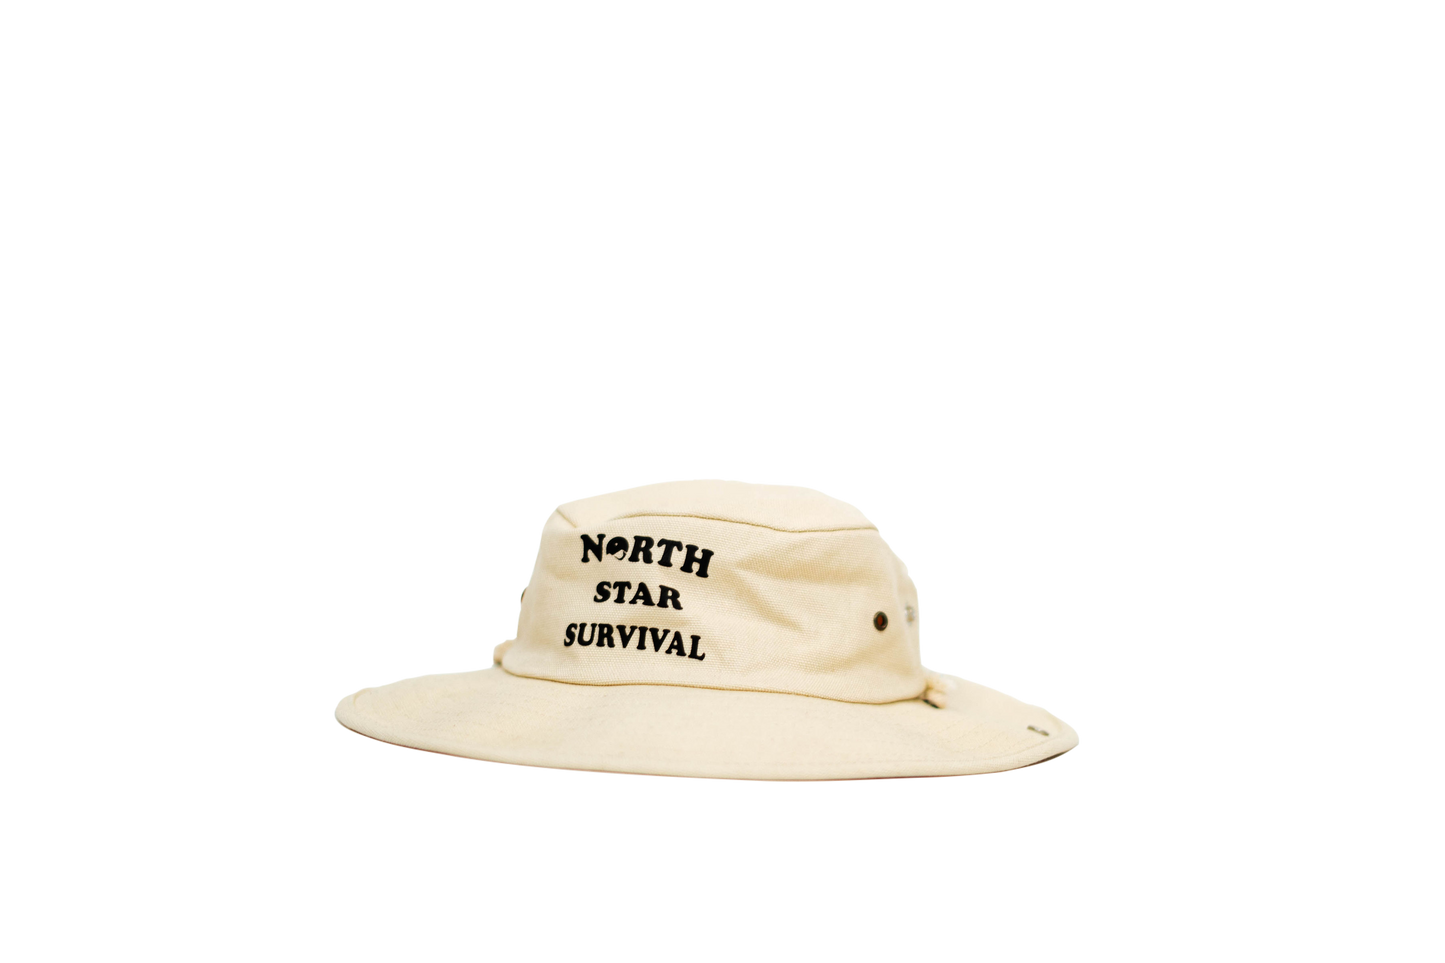 OUTBACK HAT